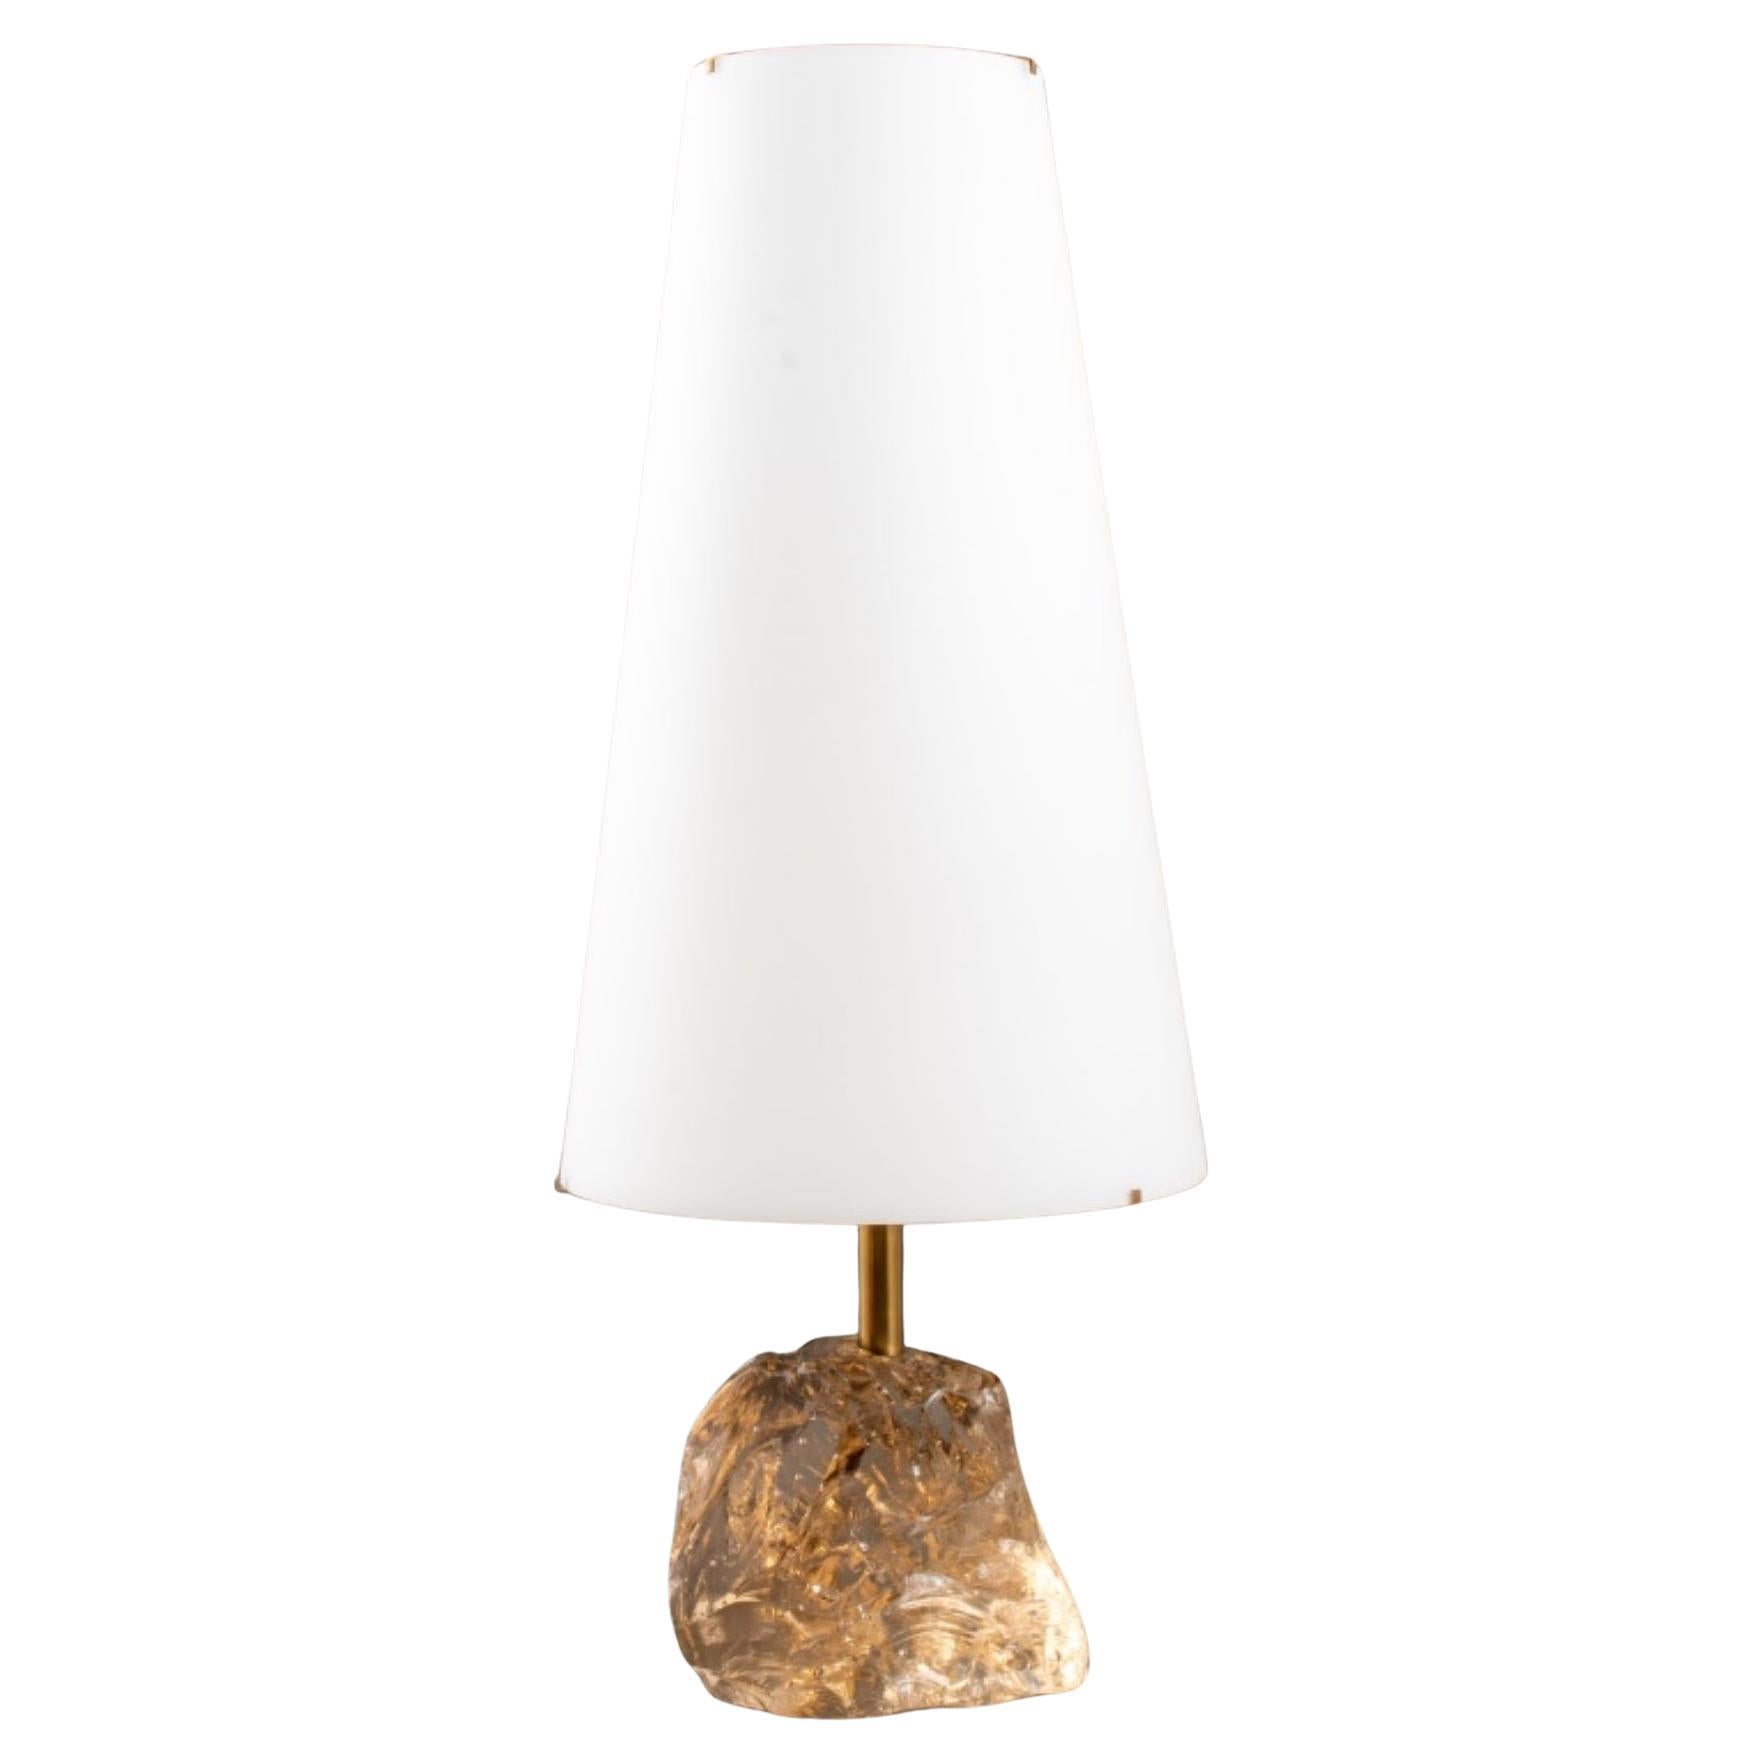 Roberto Guilio Rida Brass and Rock Crystal Lamp For Sale